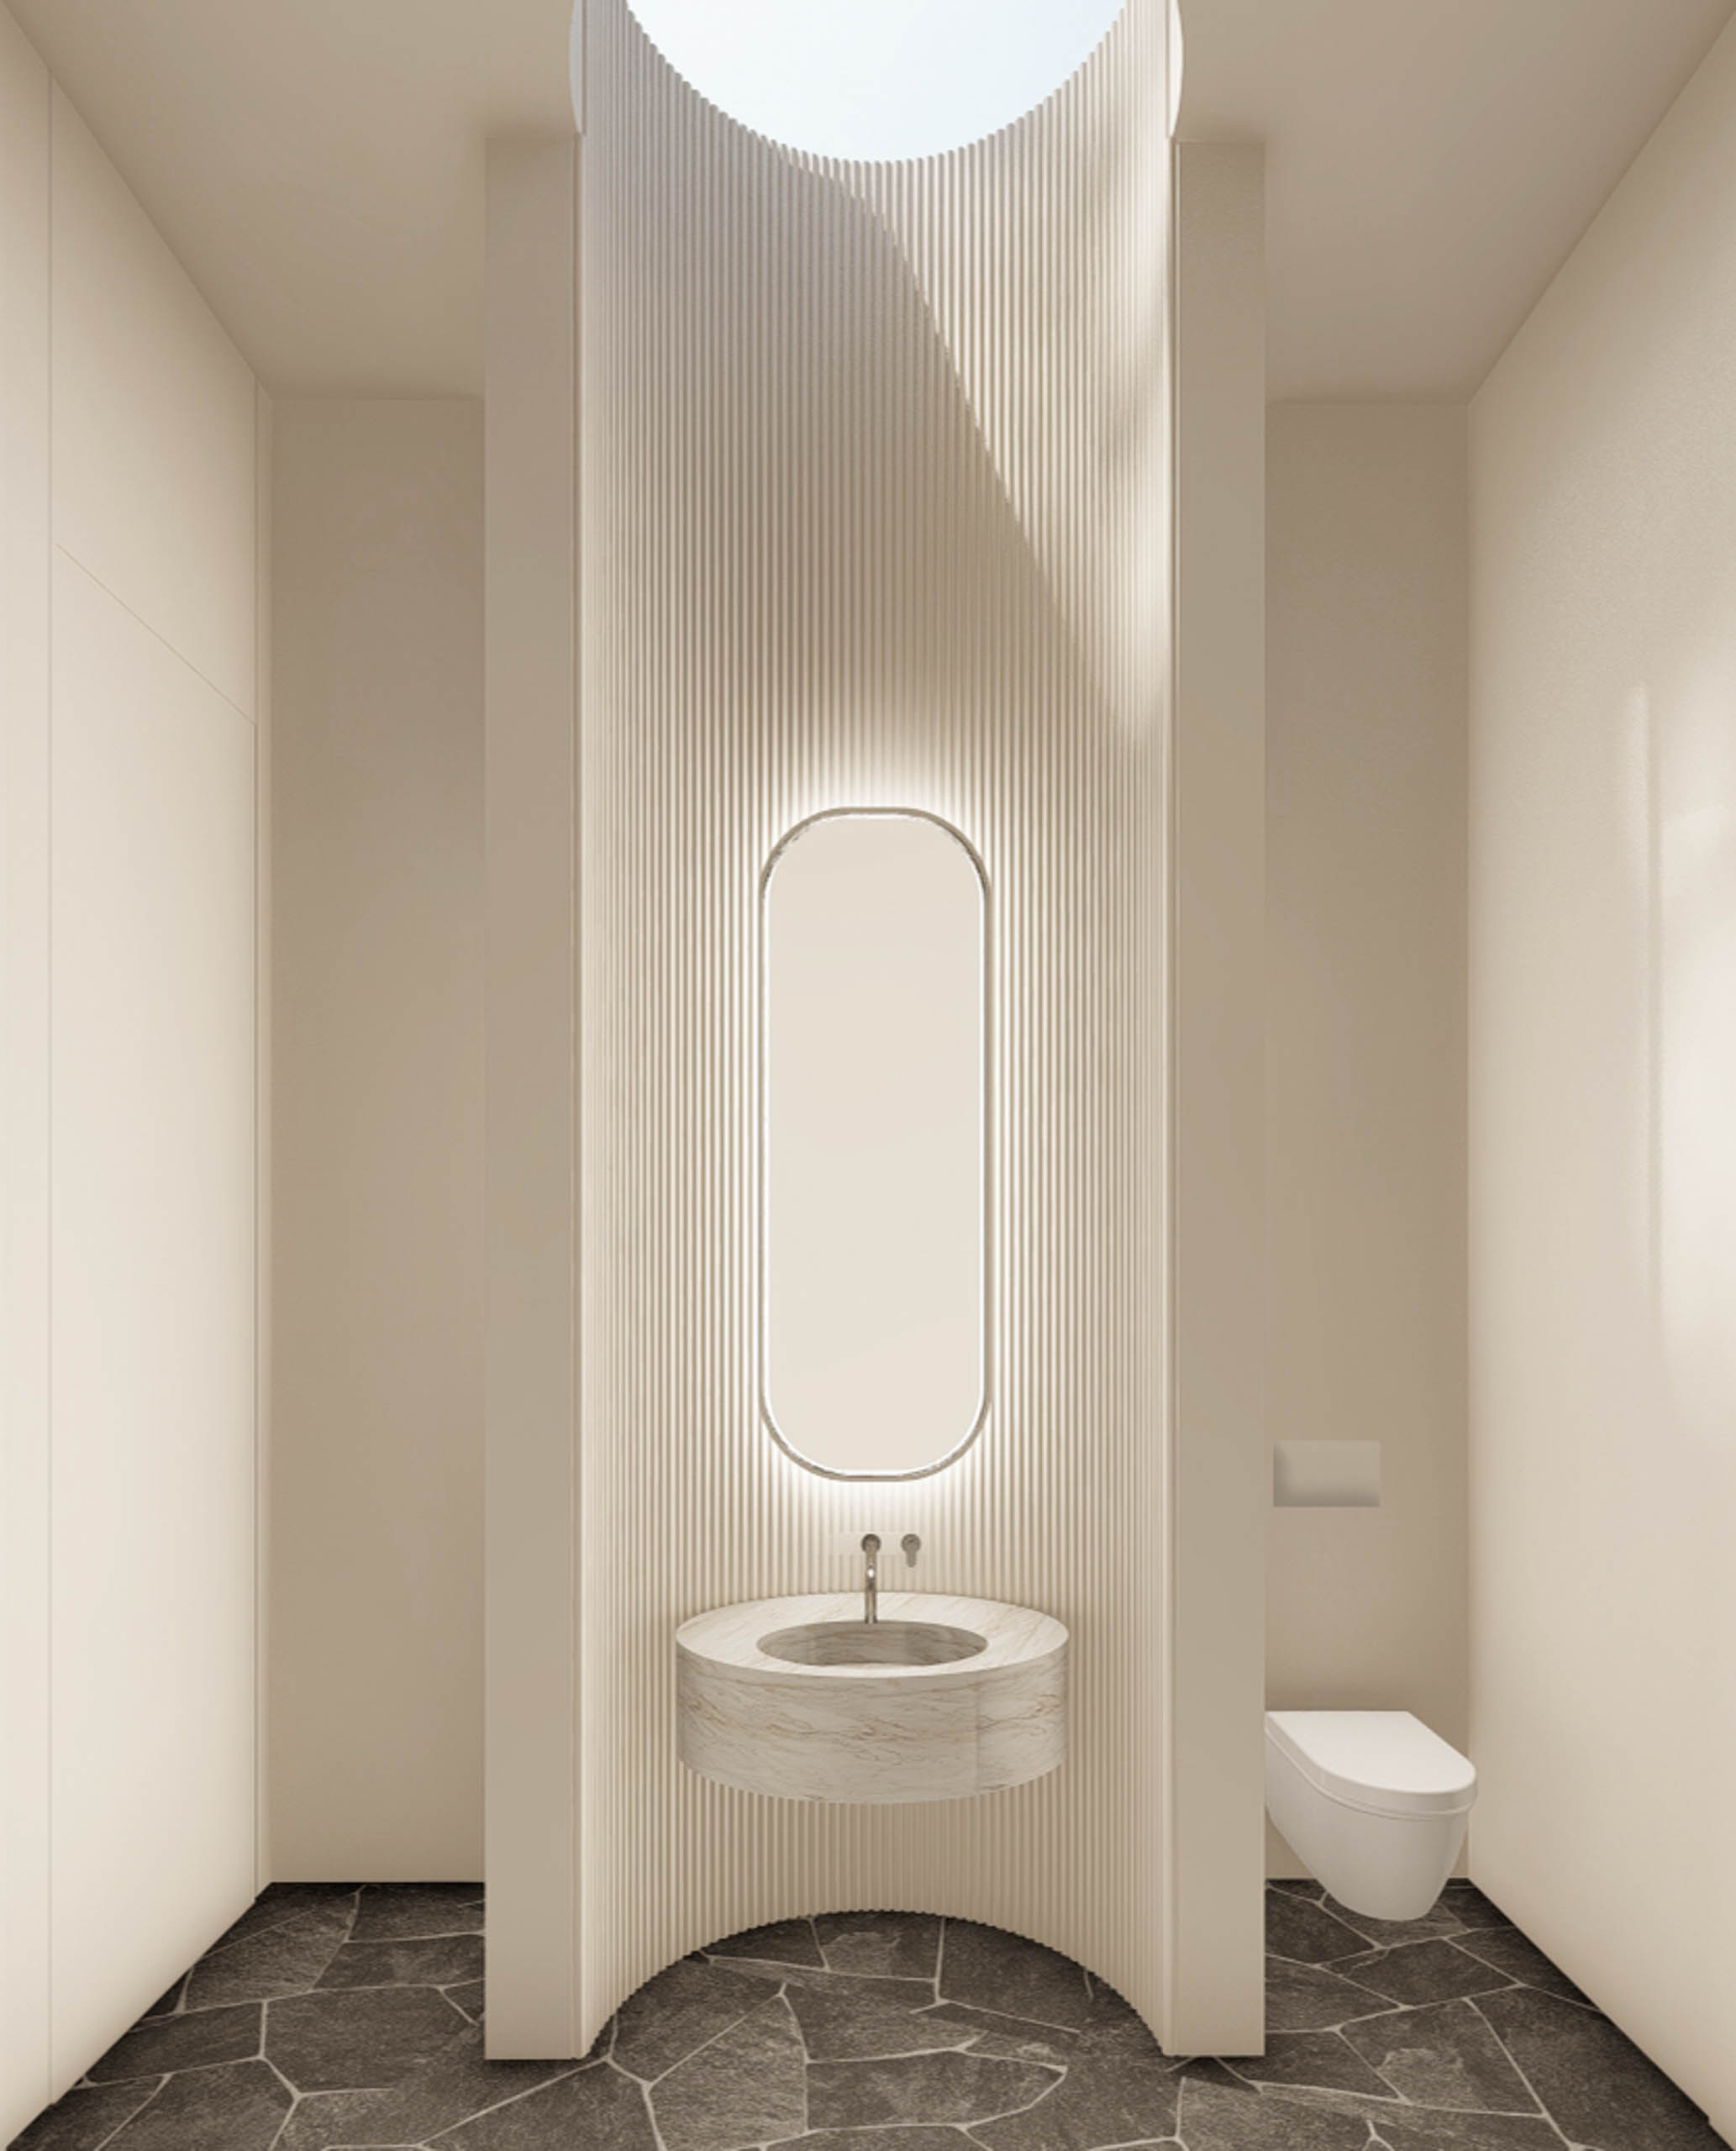 Tall white powder room with a curved cavity for the sink and tall oval mirror